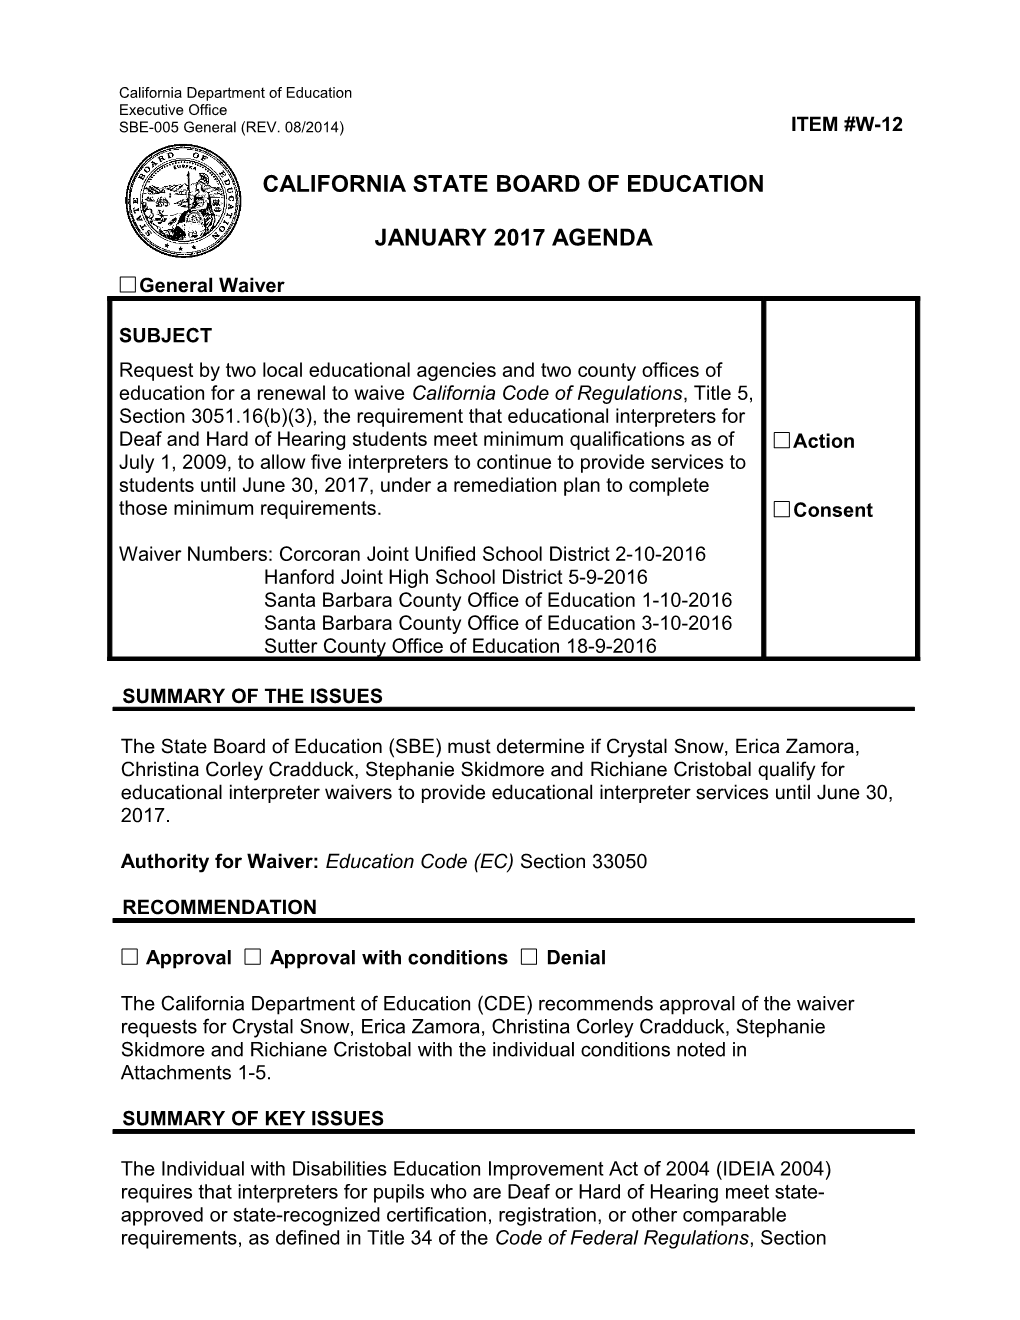 January 2017 Waiver Item W-12 - Meeting Agendas (CA State Board of Education)